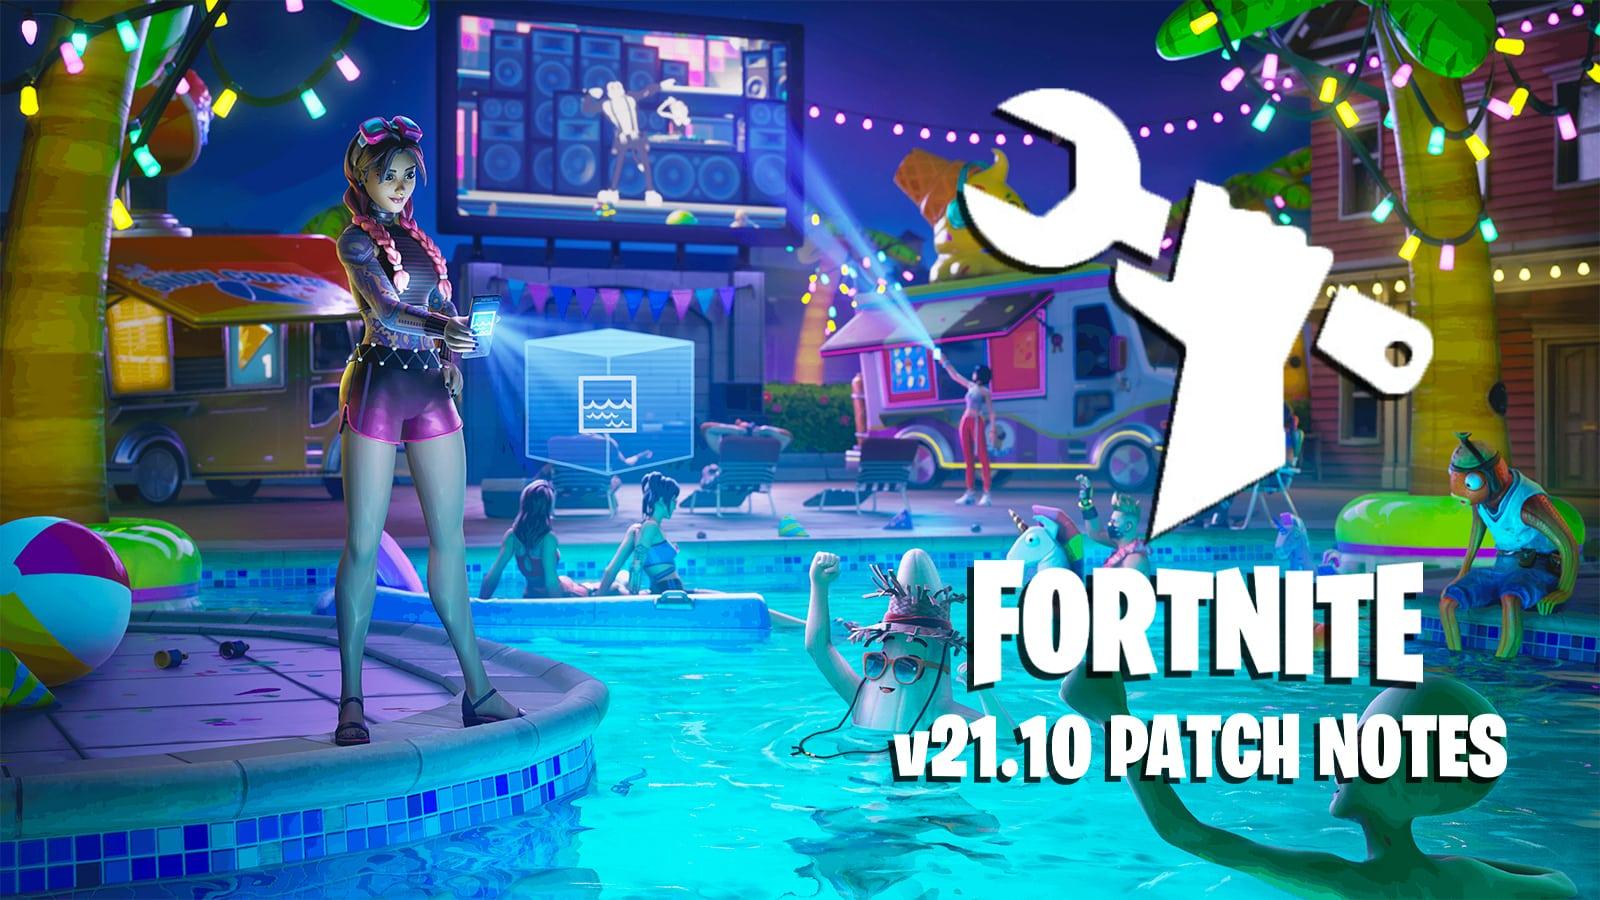 A poster for Fortnite update 21.10 patch notes